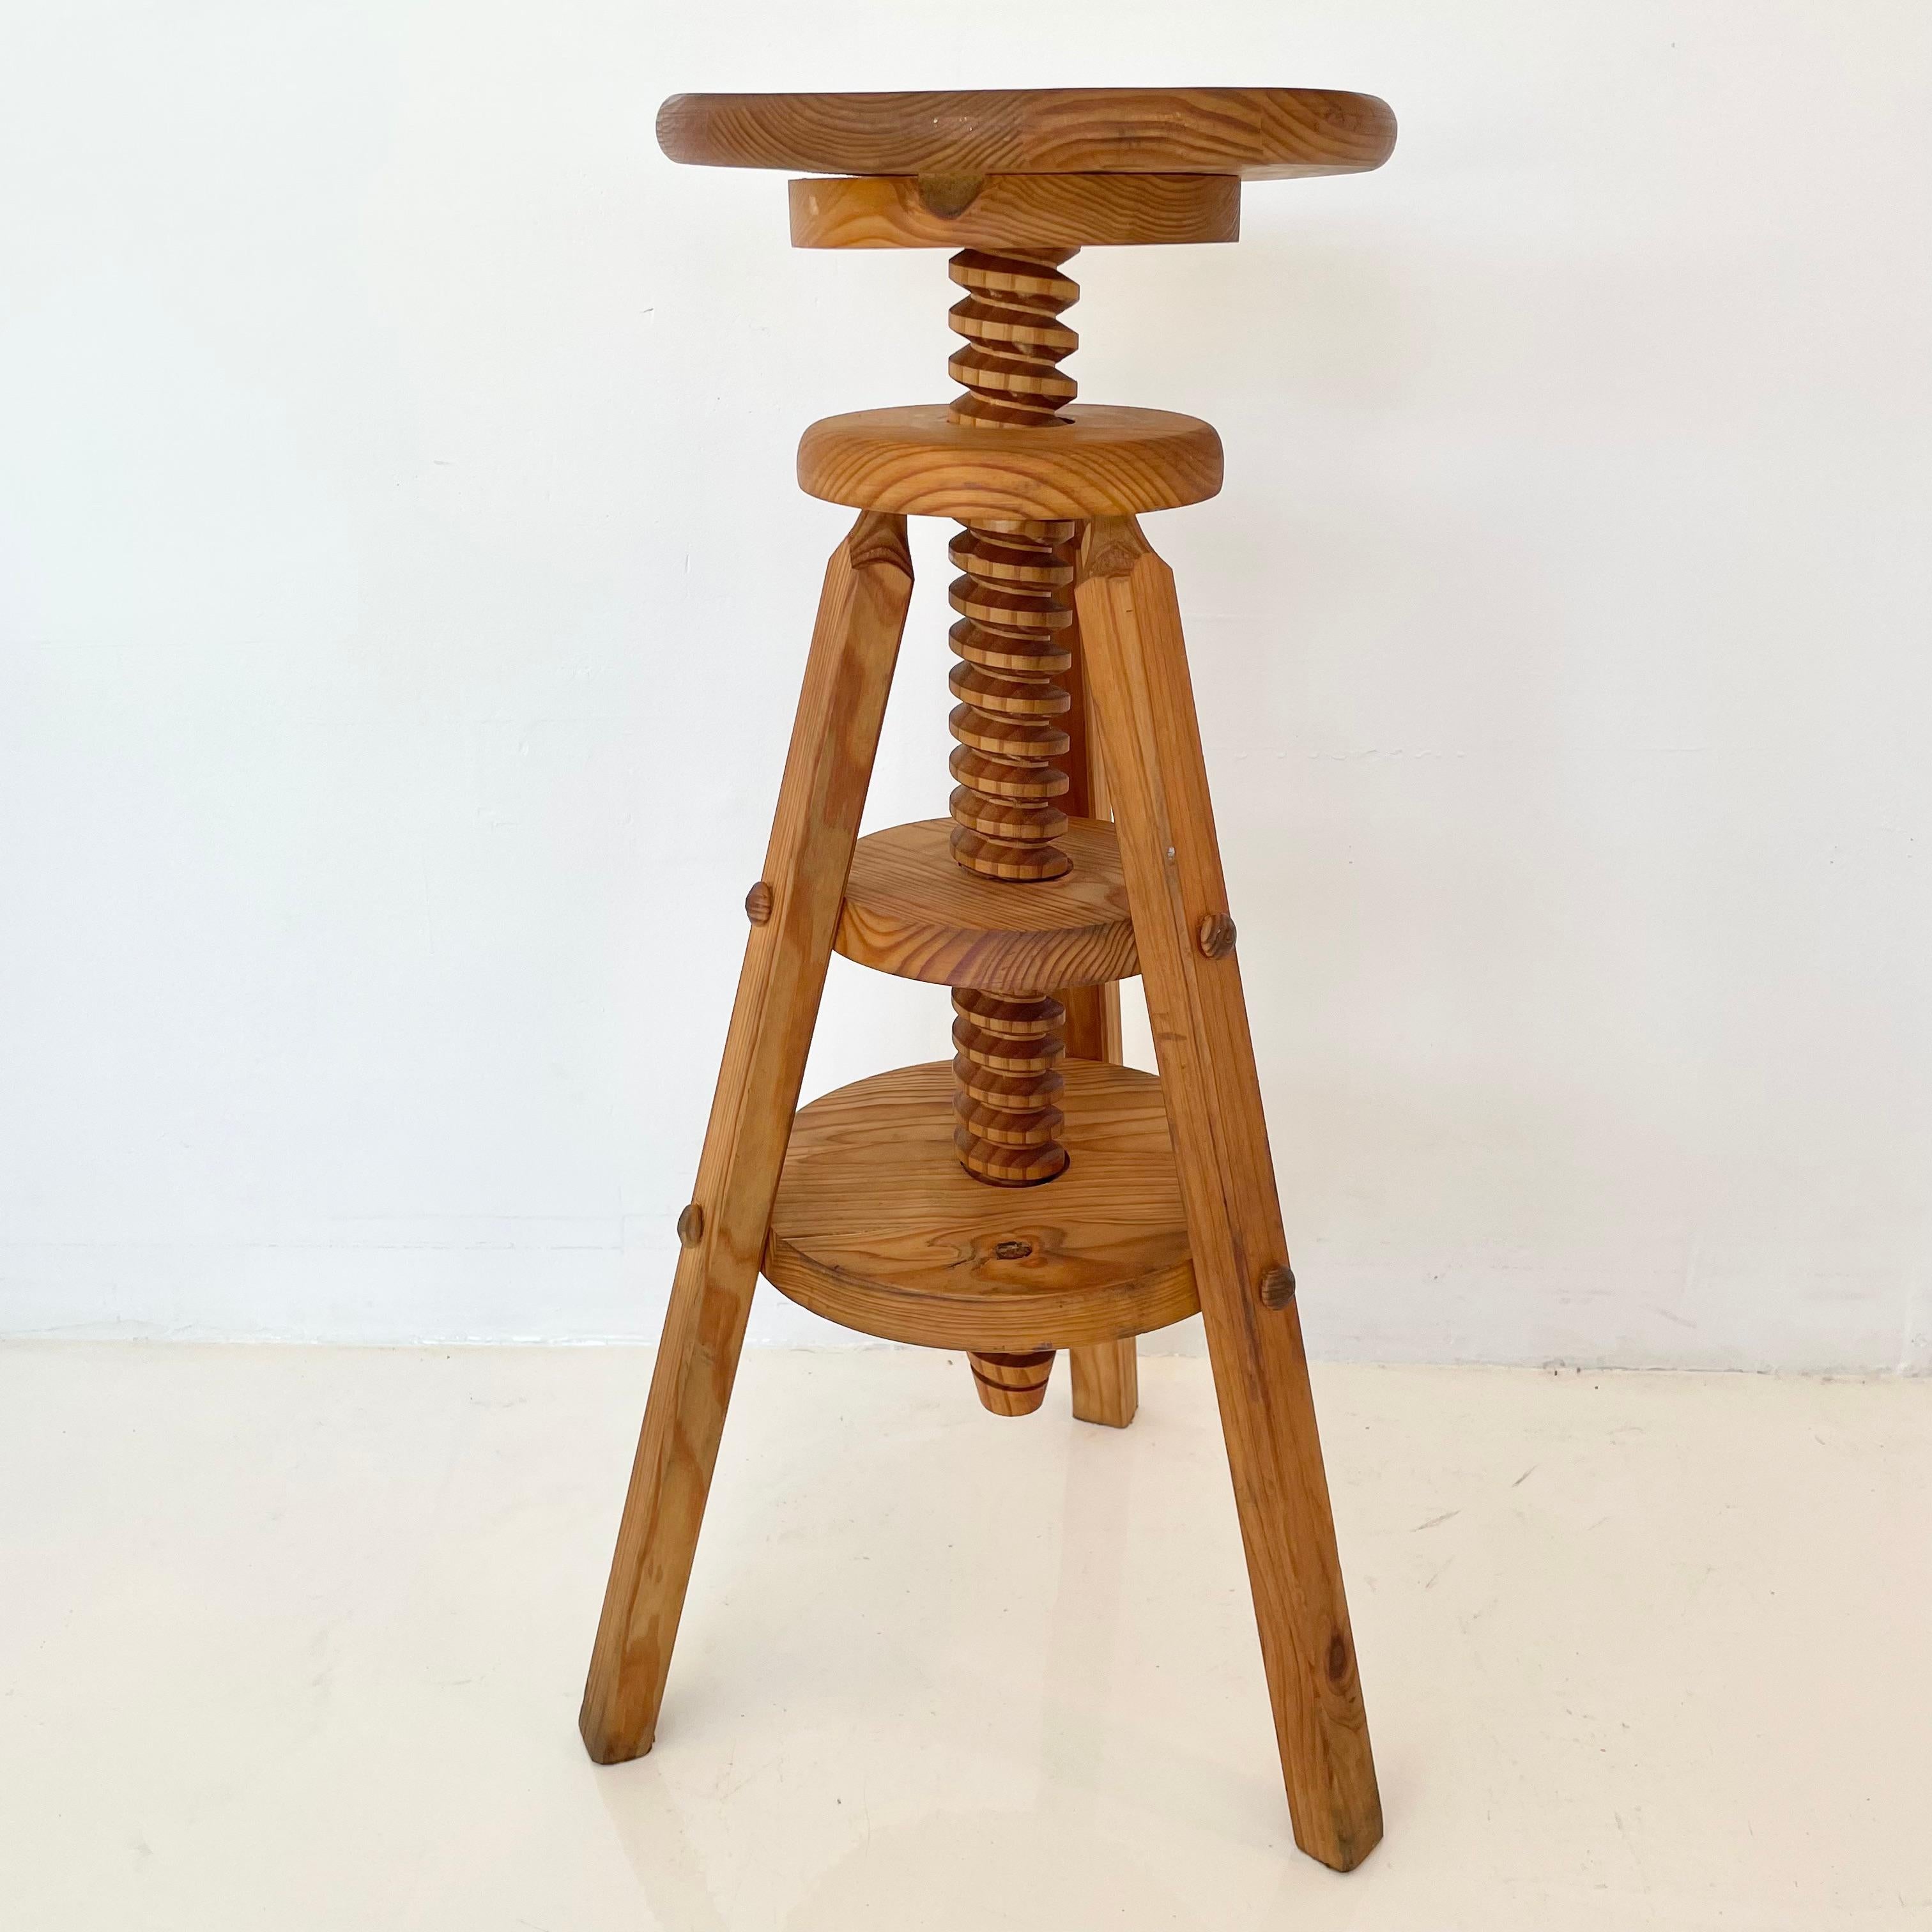 Sculptural stool made entirely of wood. Large wood screw penetrates the three tiers of the stool allowing the height to be adjustable with a quick spin. Great for the piano, showcasing art or a standalone seat. Good vintage condition. Measures: